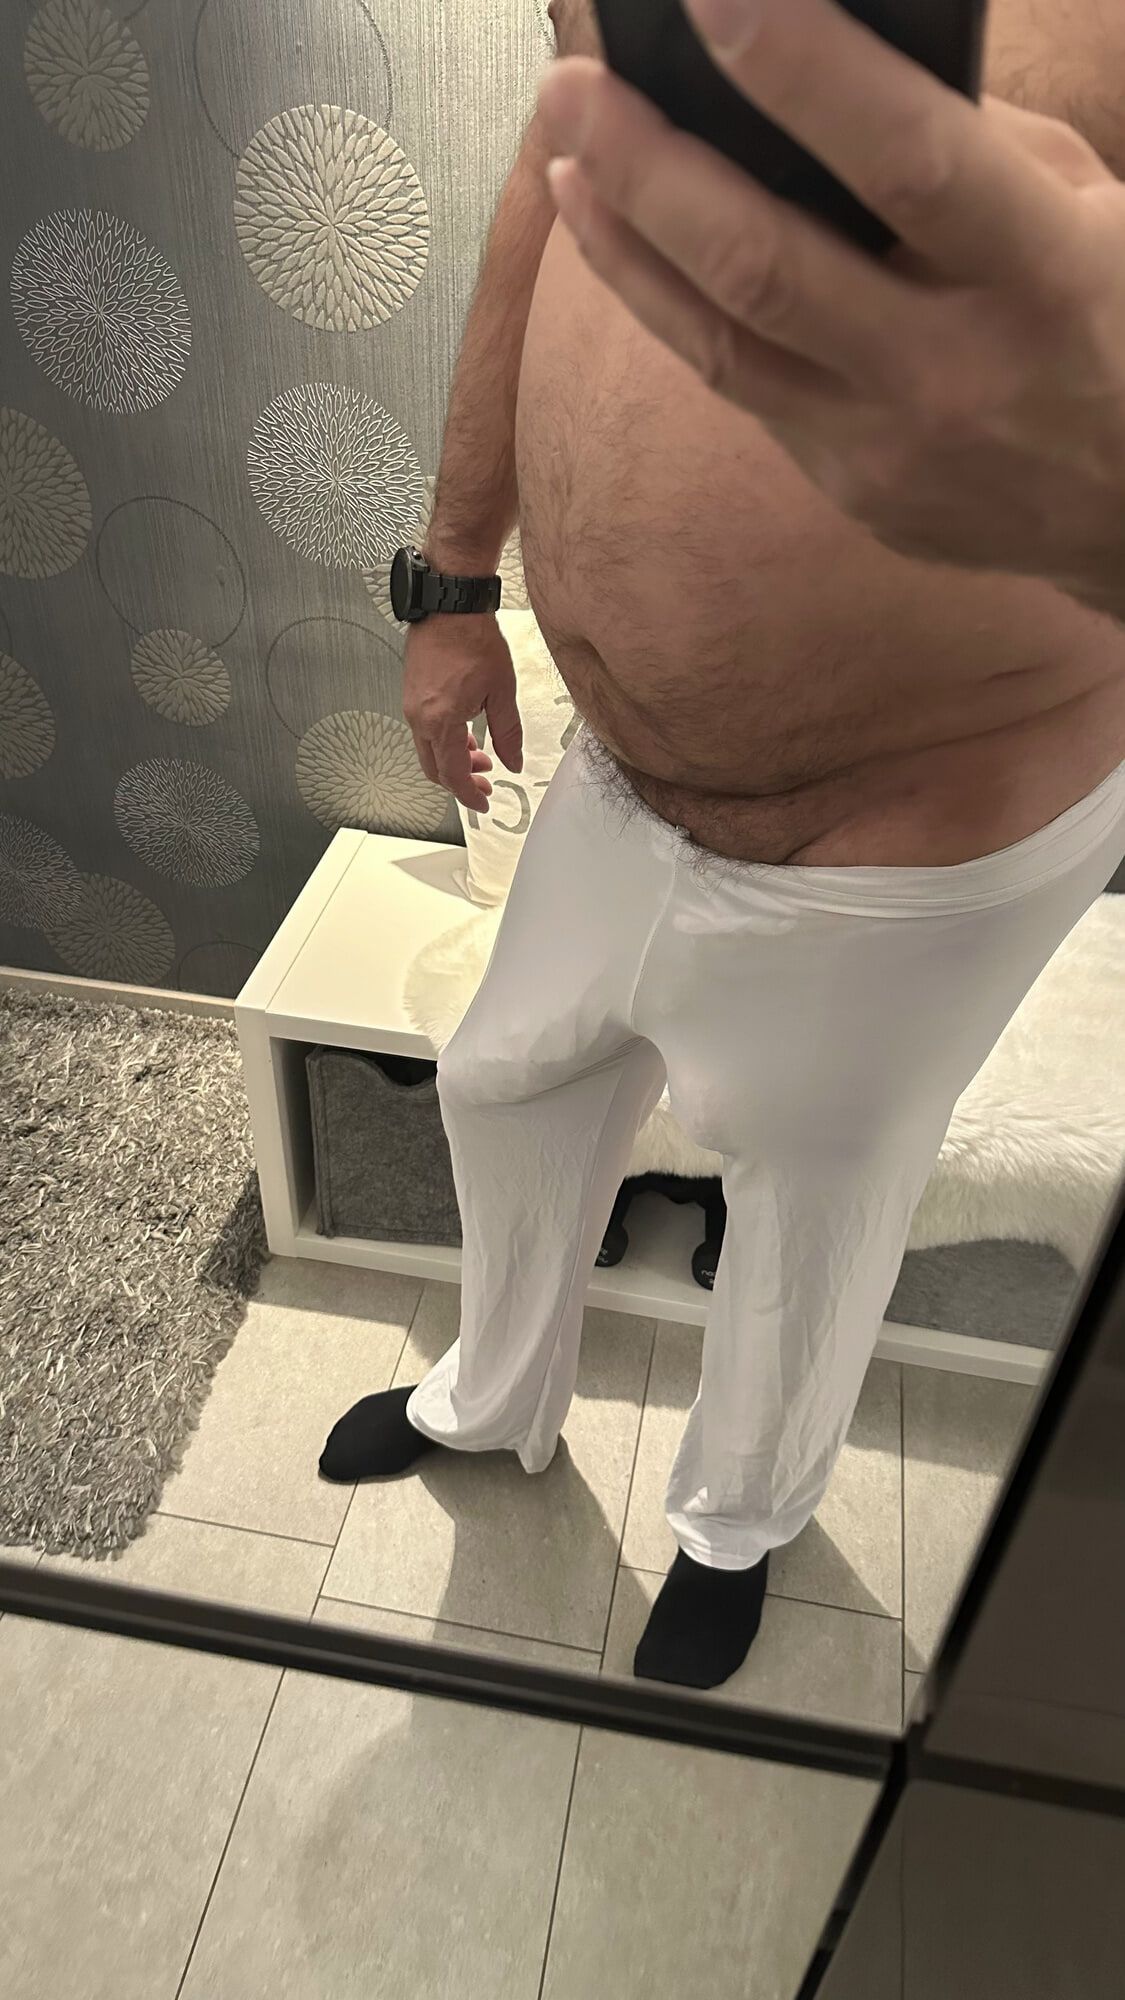 XXL Cock with Pants #5